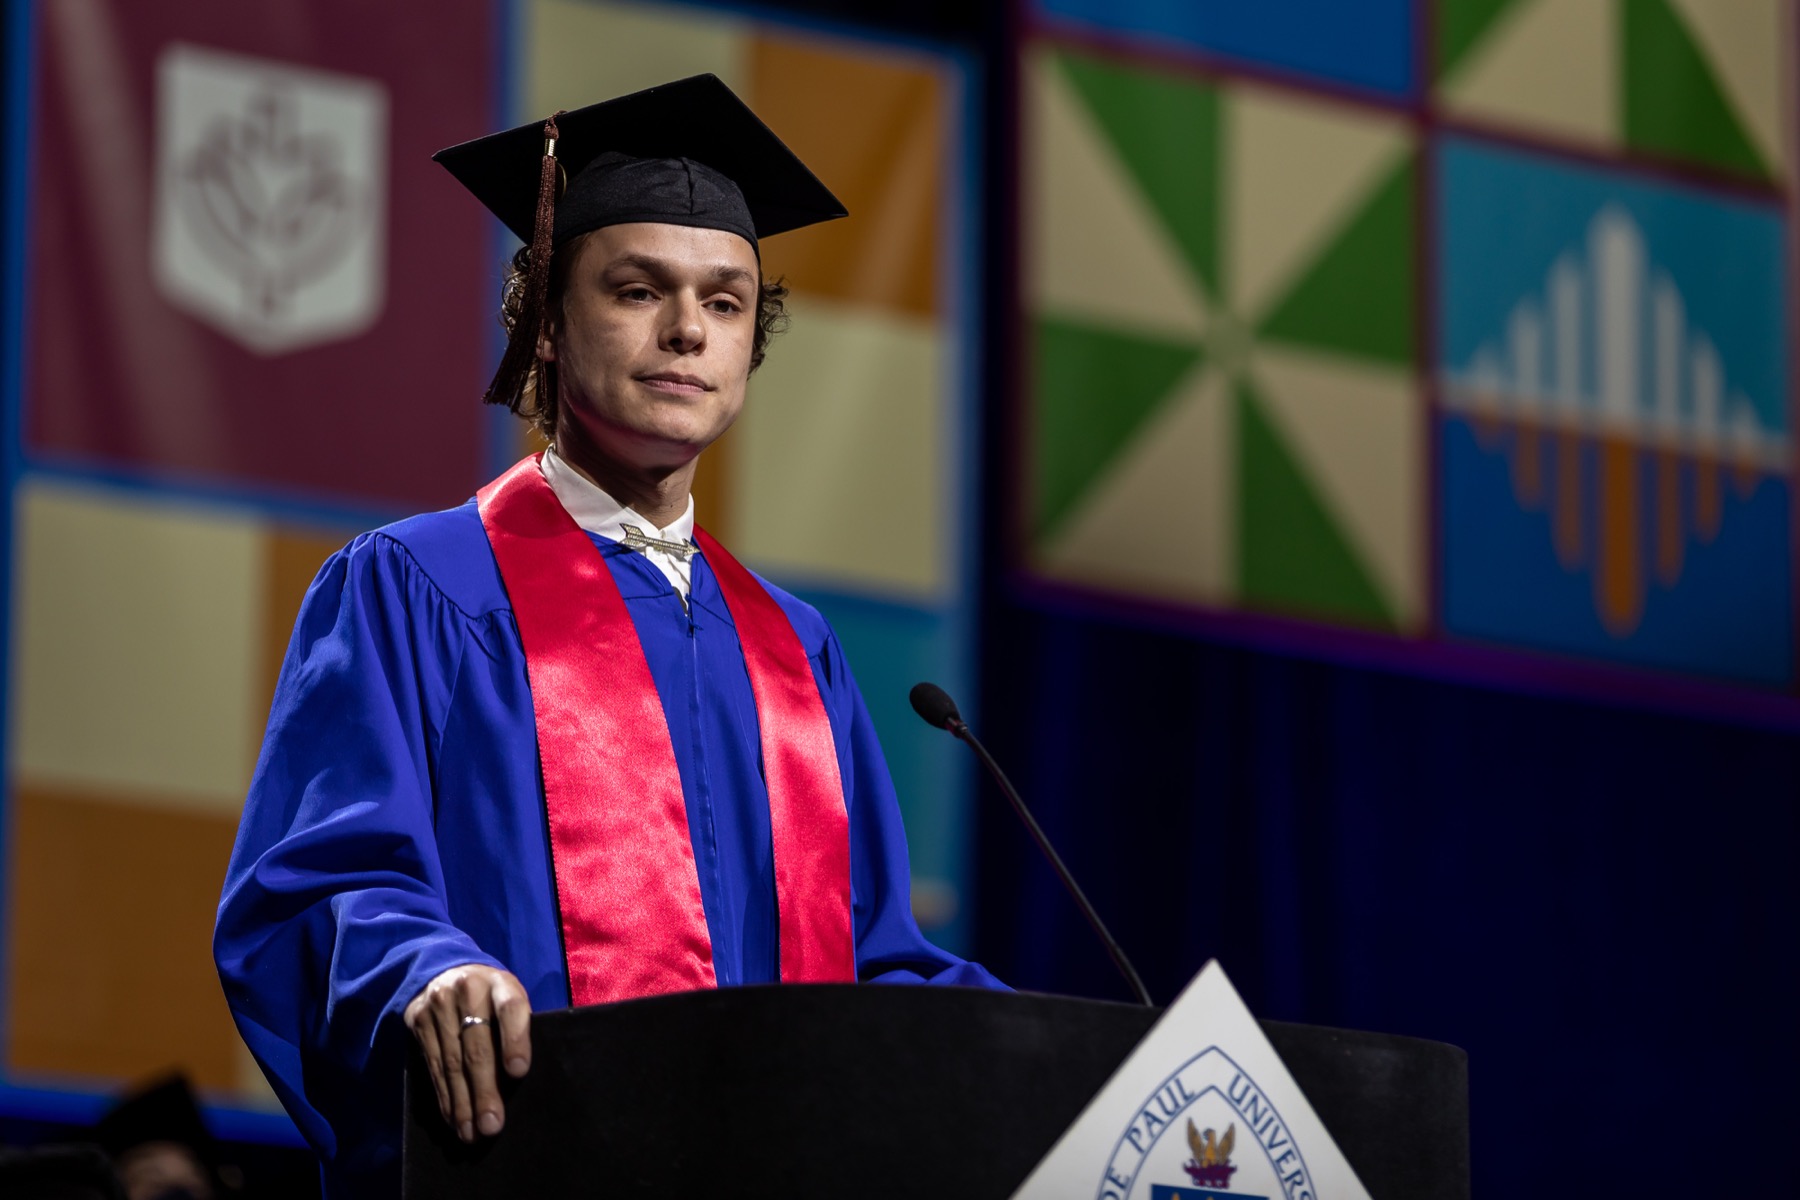 Sam Kerns, Class of 2022, delivered the student address at the The Theatre School and the Jarvis College of Computing and Digital Media graduation.